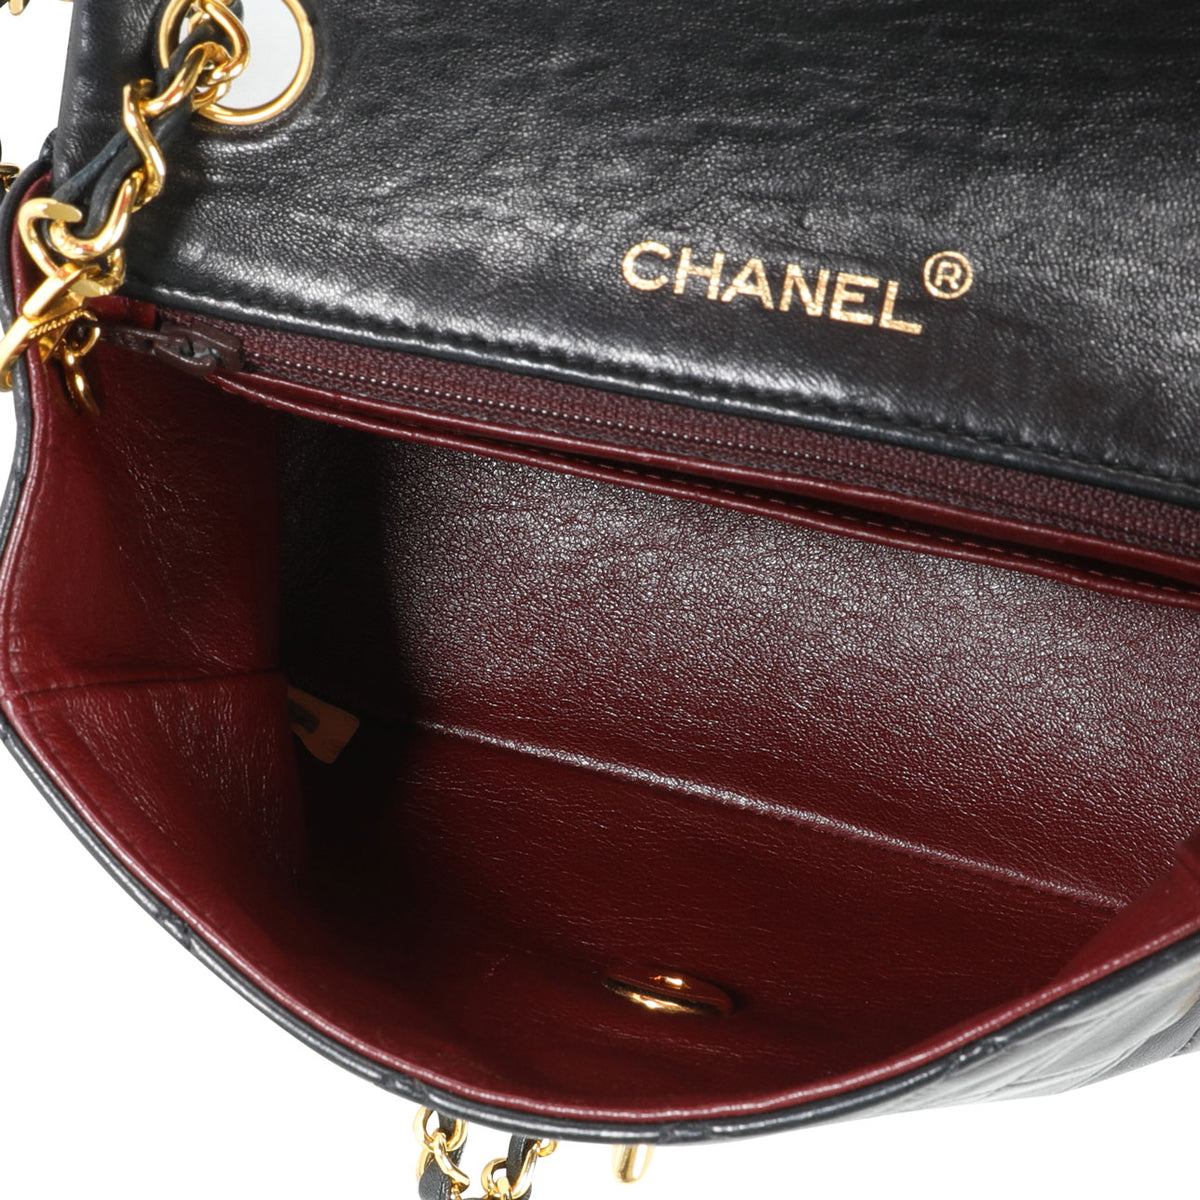 Chanel Vintage Gold Quilted Lambskin Mini Square Flap Bag, myGemma